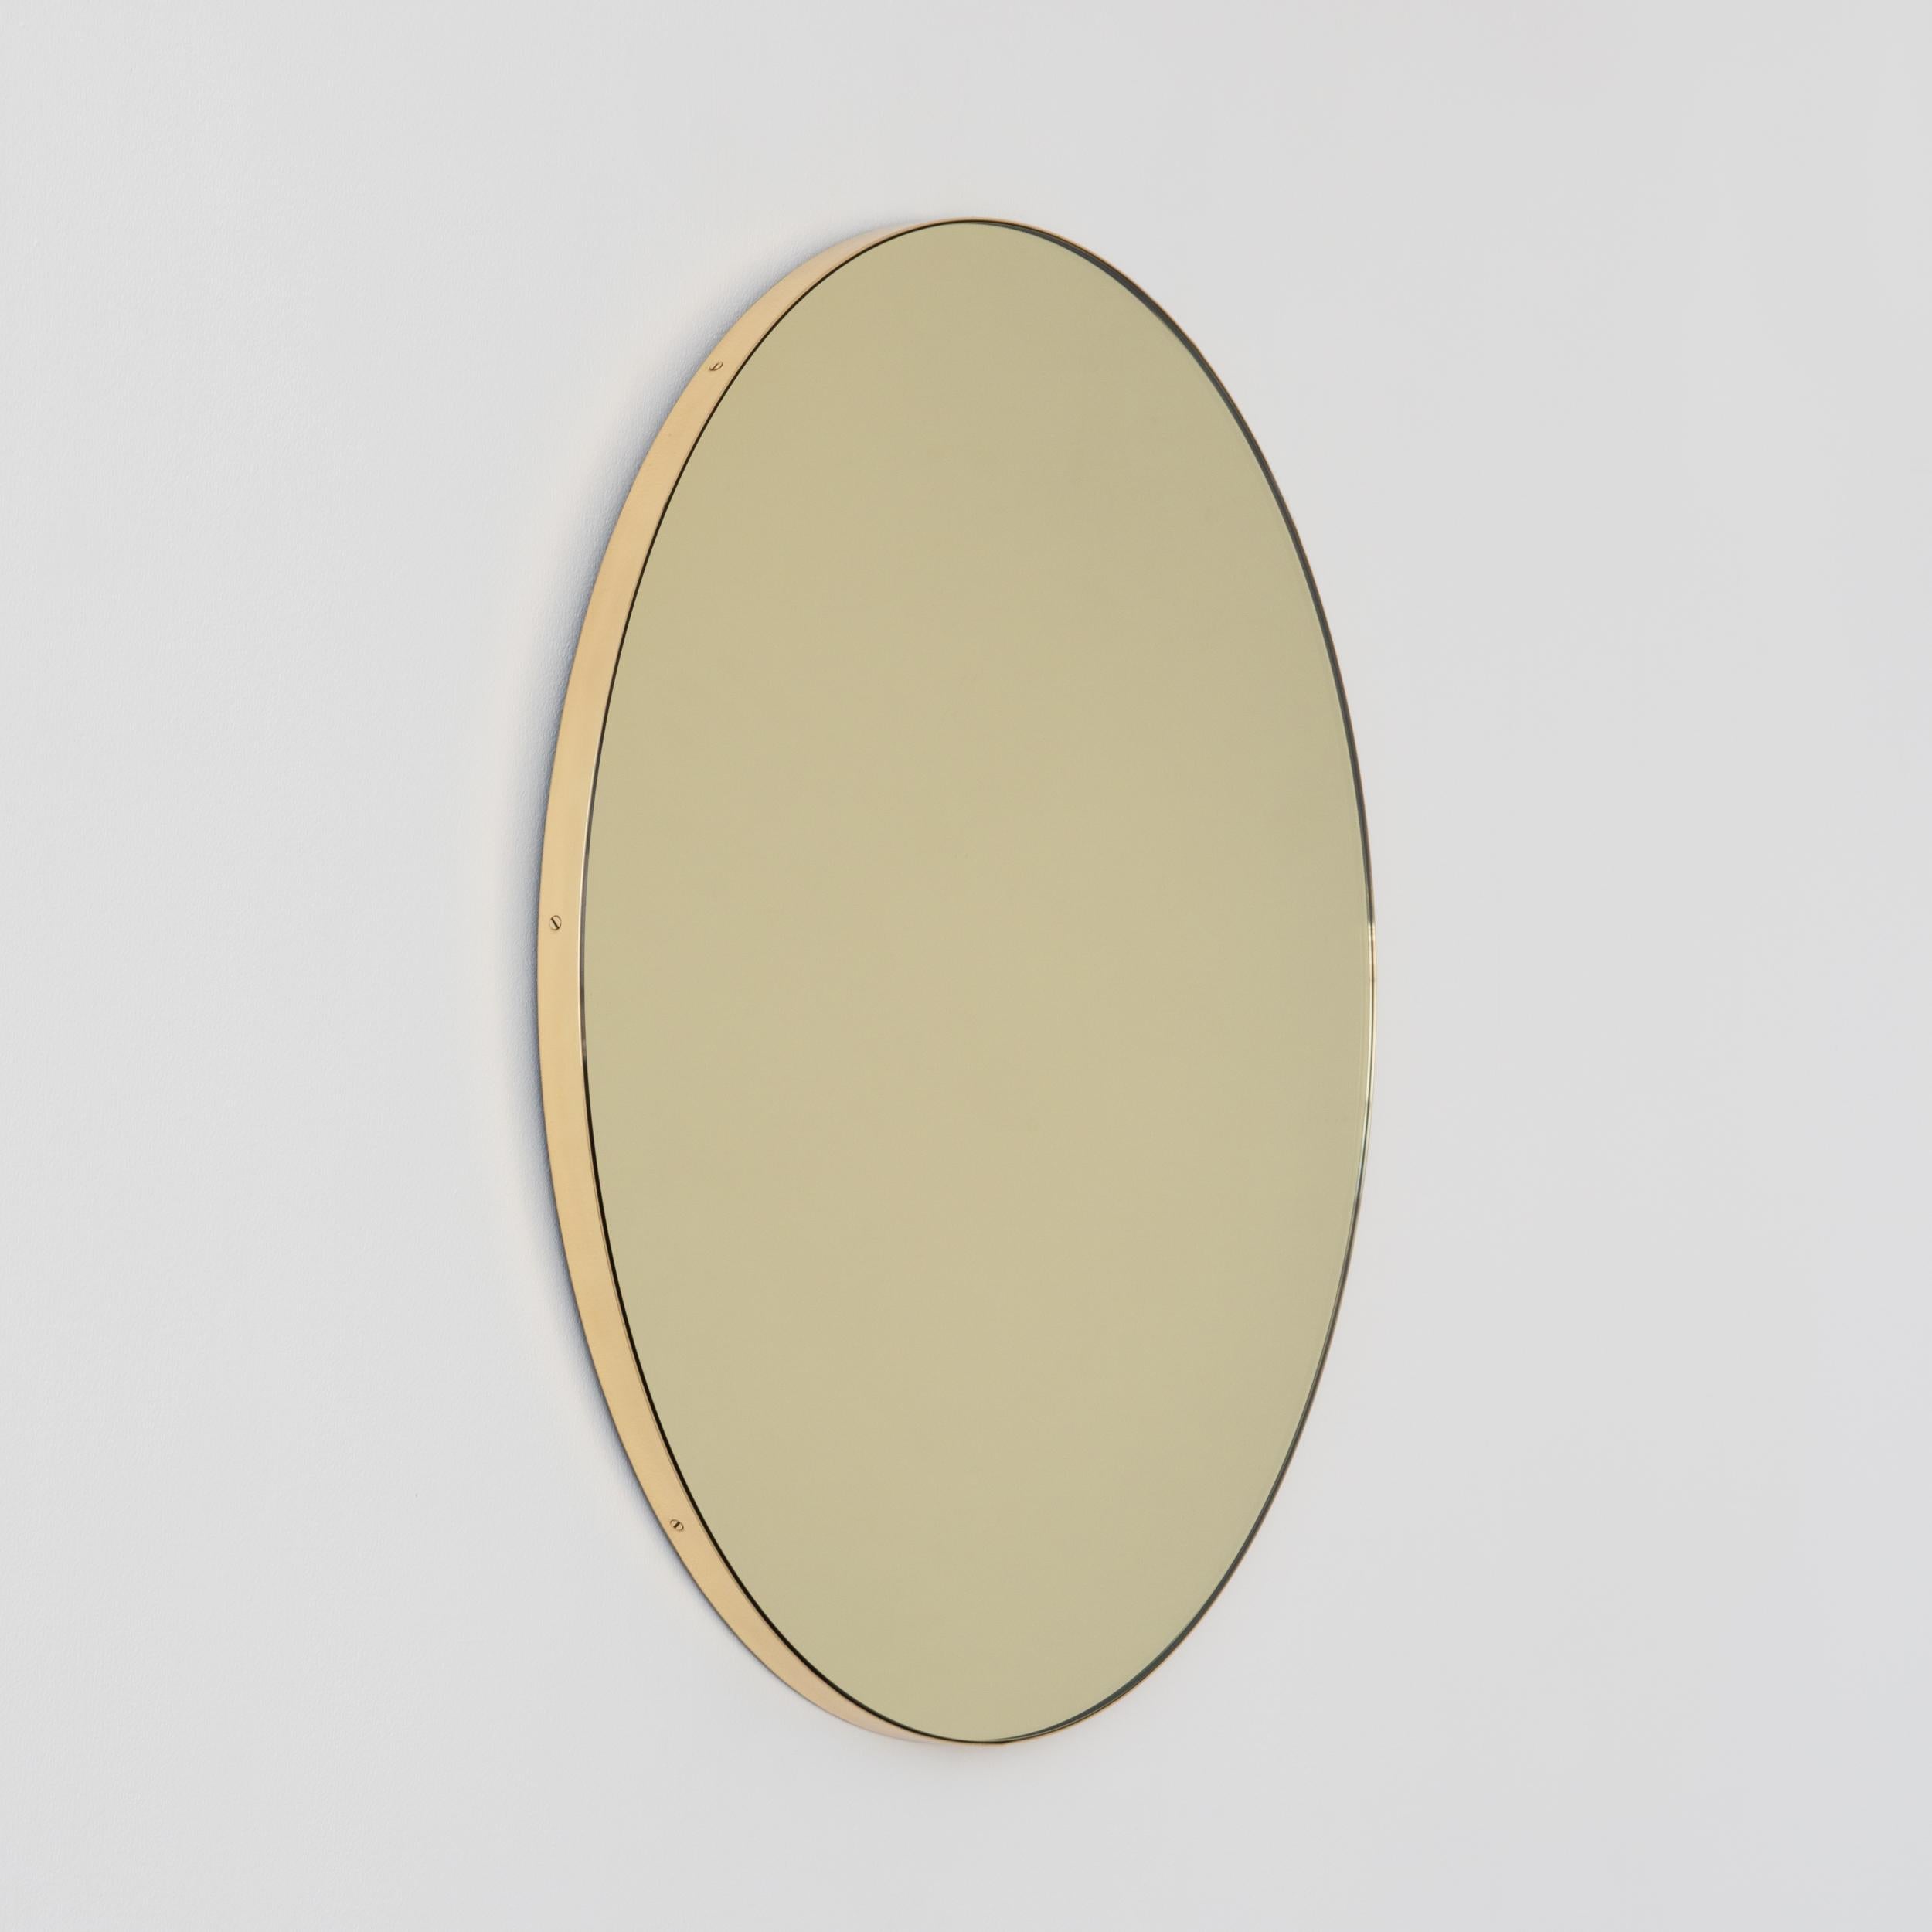 In Stock Orbis Gold Tinted Round Contemporary Mirror, Brass Frame, Medium In New Condition For Sale In London, GB